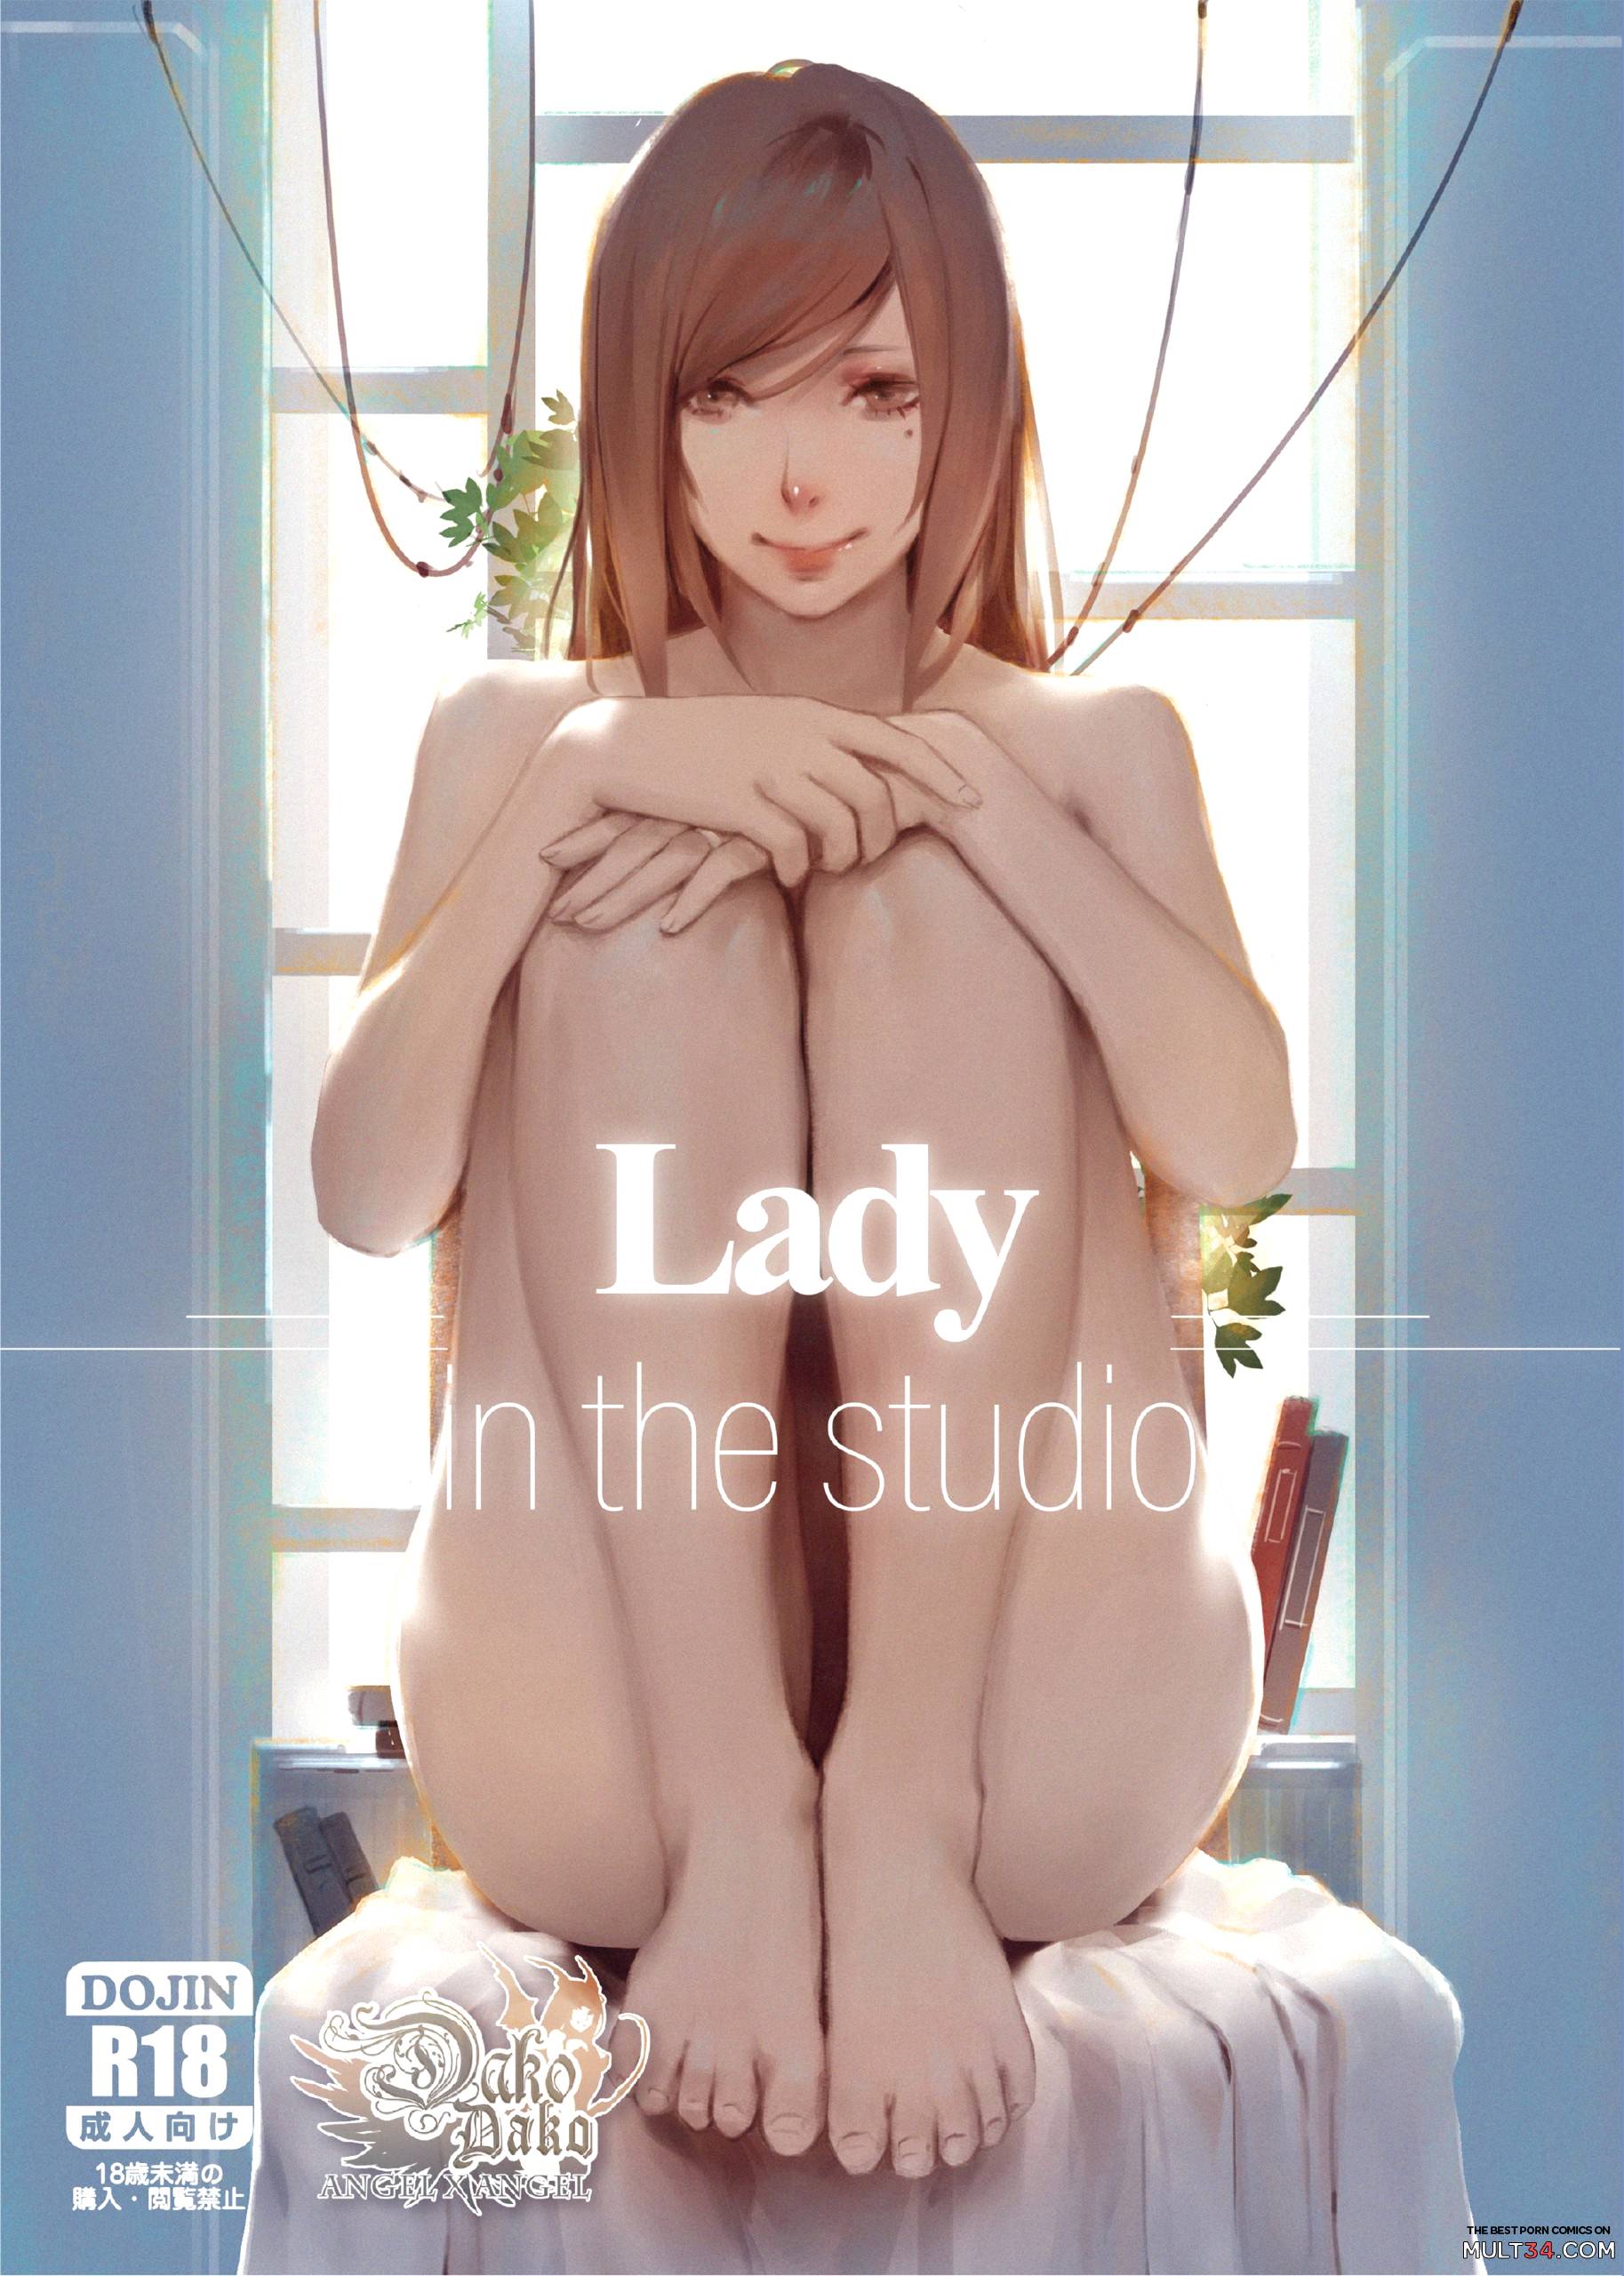 Lady "In the Studio" page 1